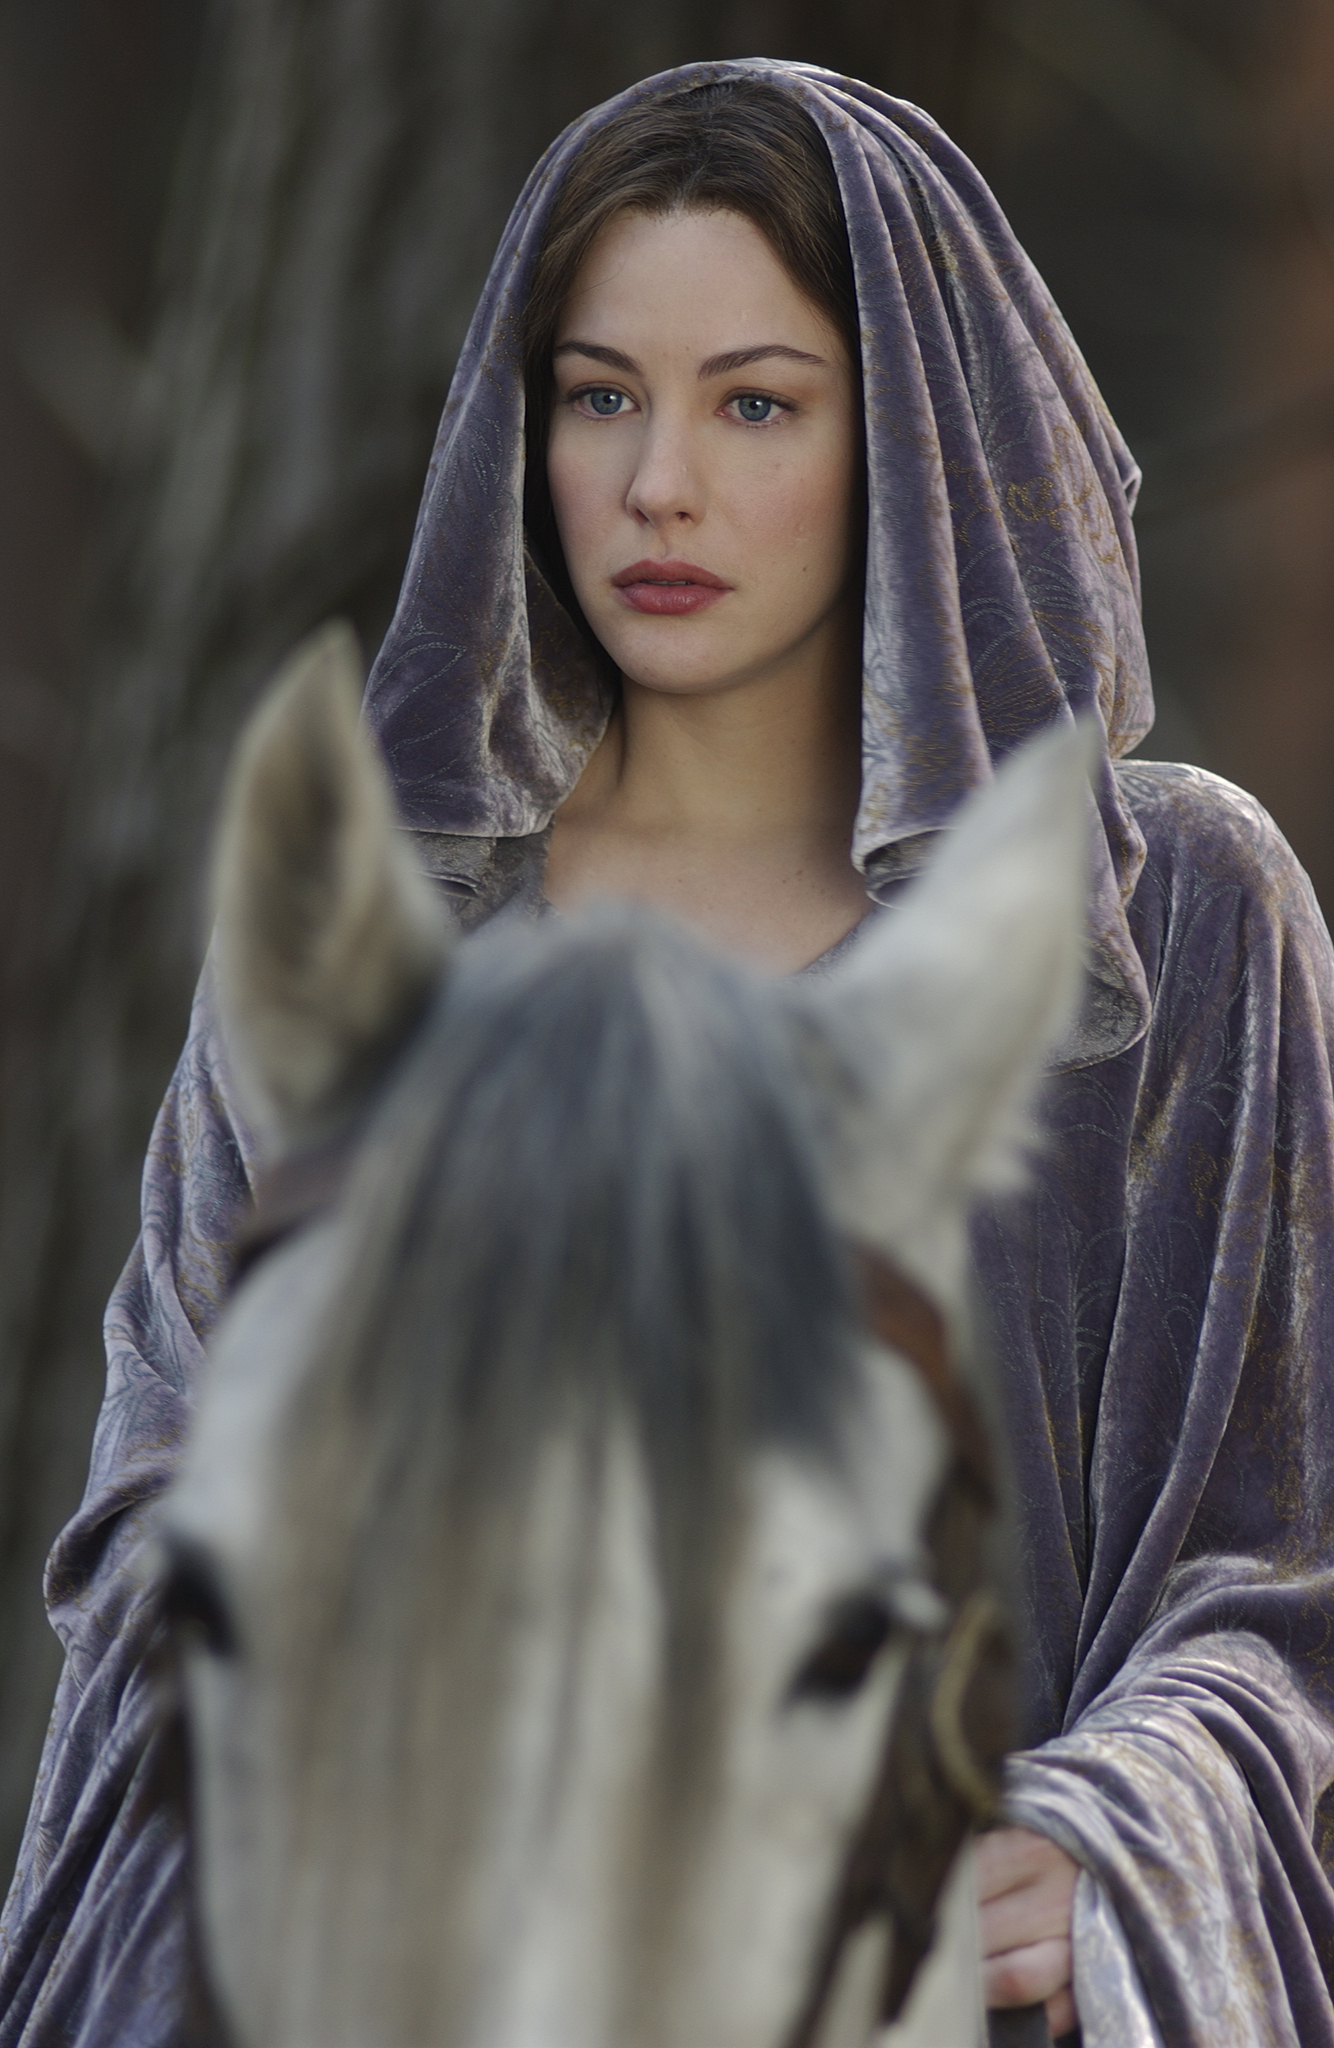 Liv Tyler in The Lord of the Rings: The Return of the King (2003)